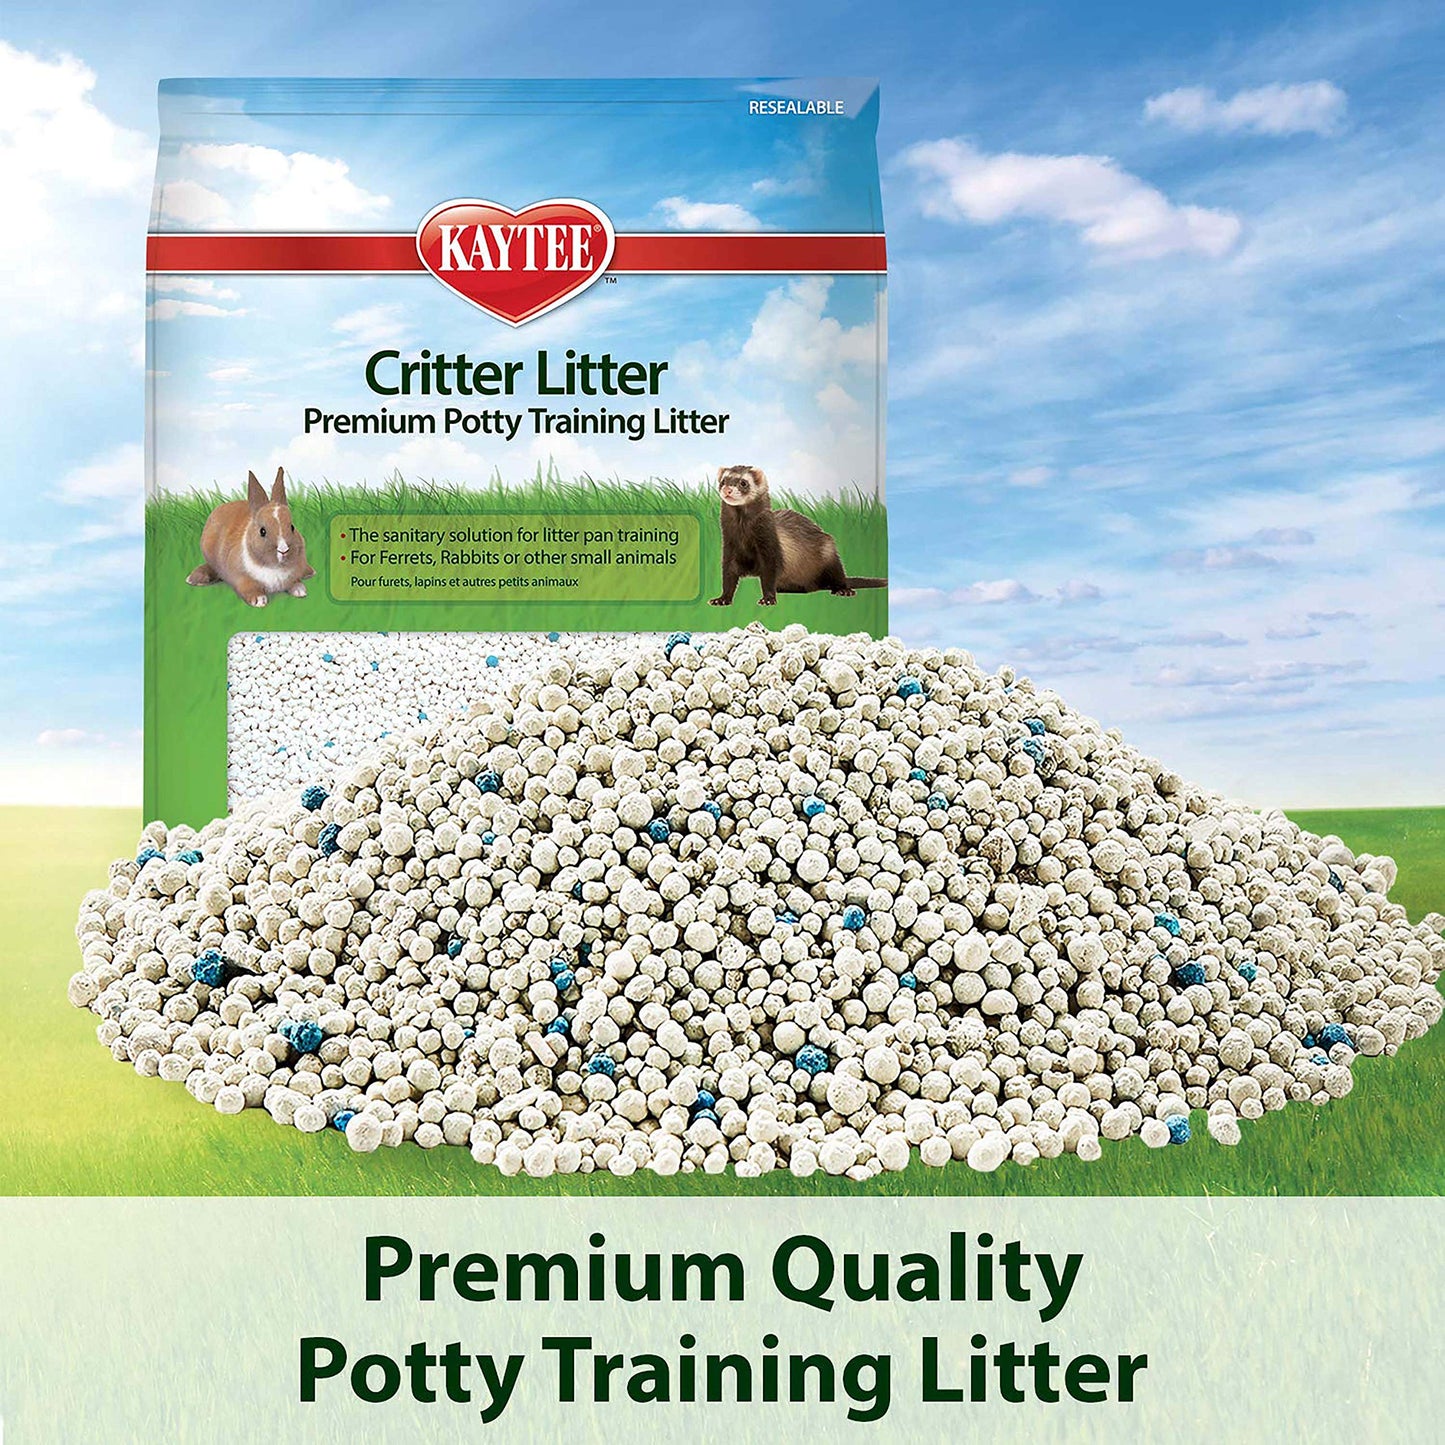 Kaytee Premium Potty Training Critter Litter for Pet Ferrets, Rabbits & Other Small Animals, 8 lb